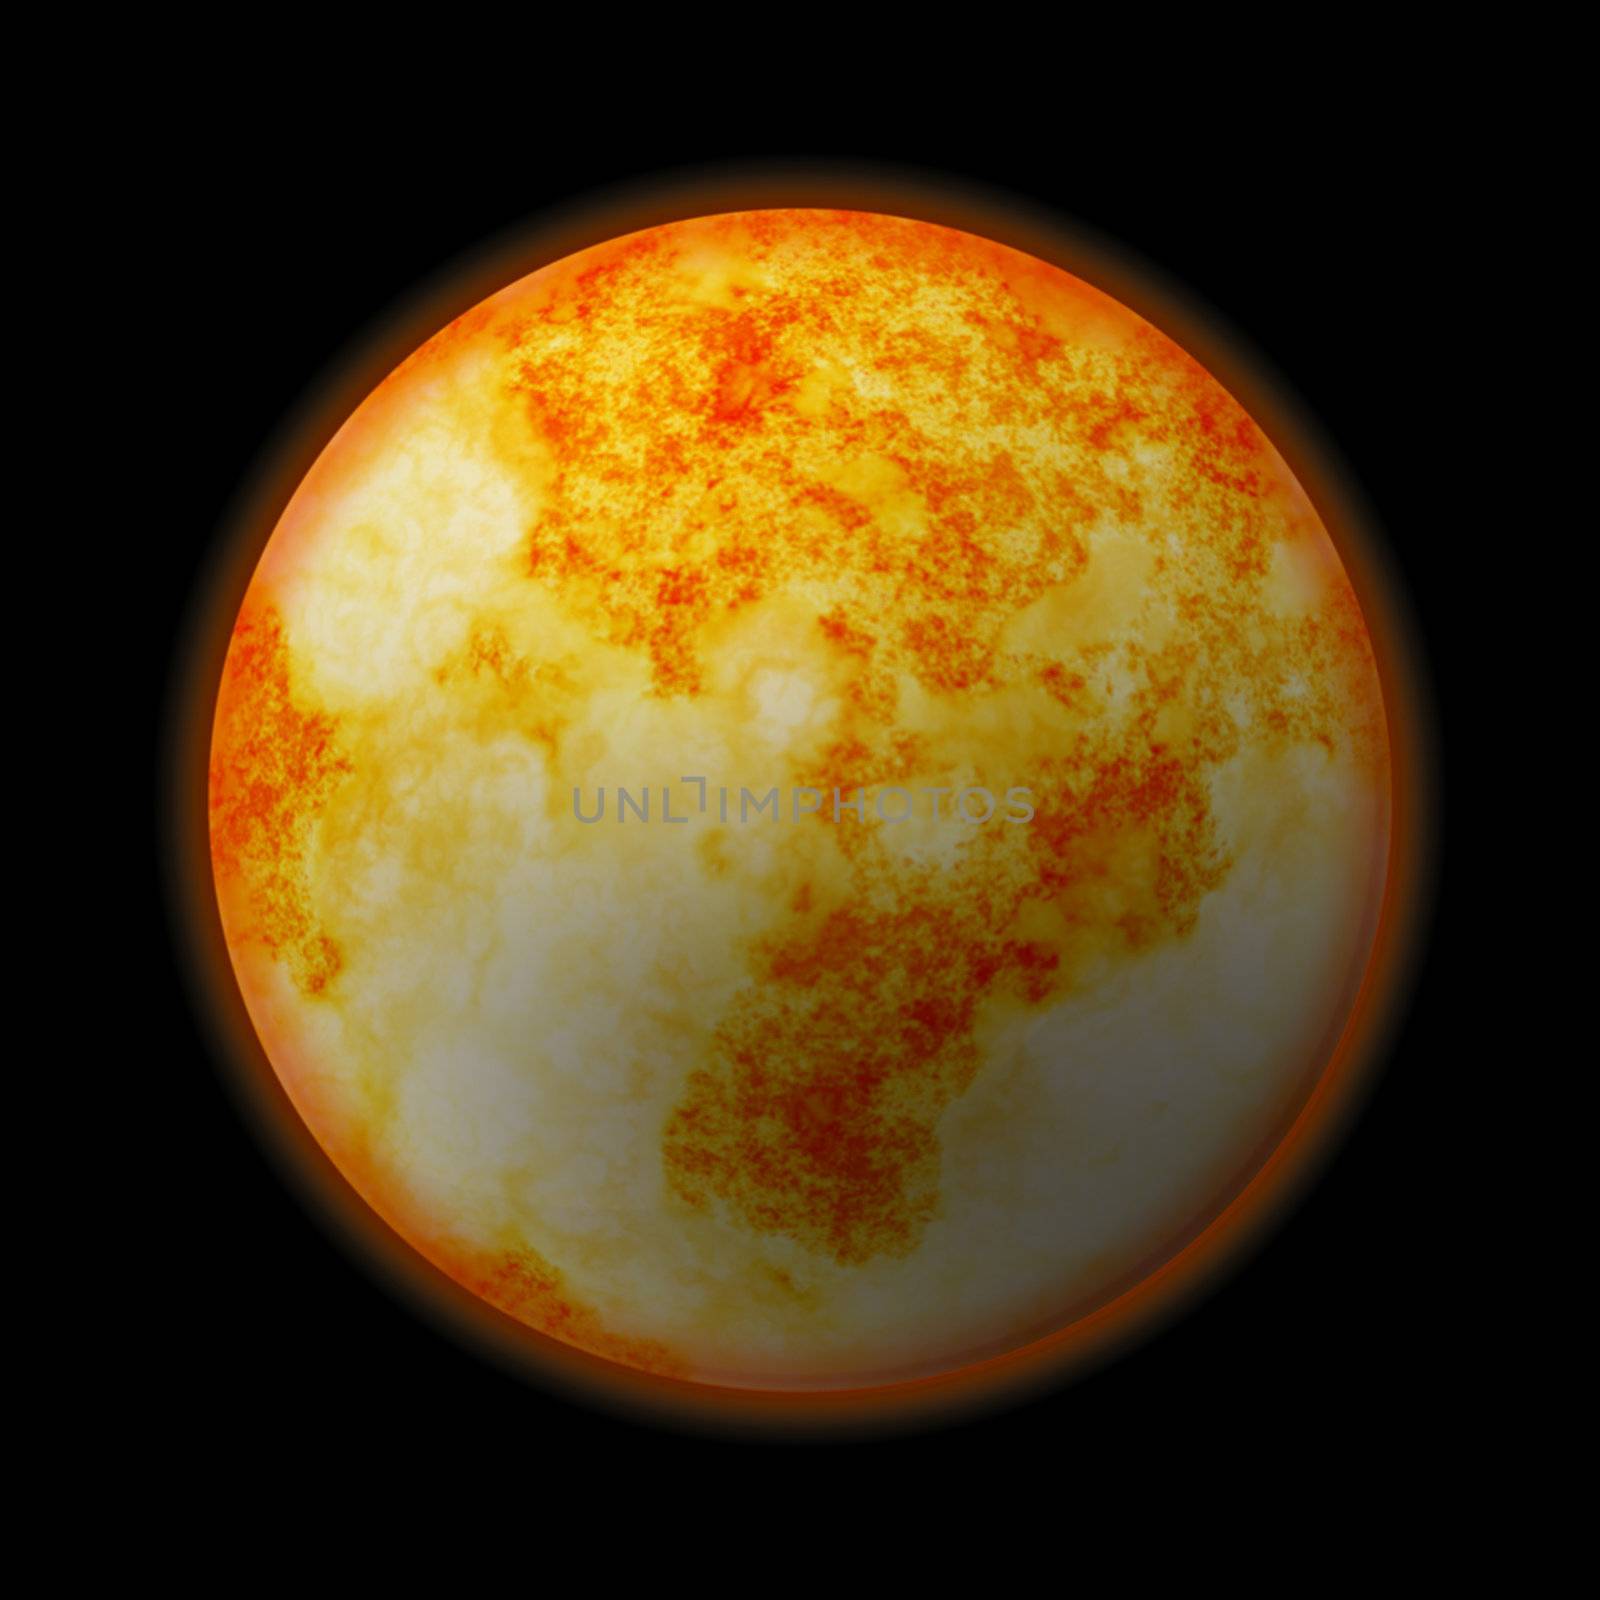 A red hot glowing planet - it works well as Mars or the Sun